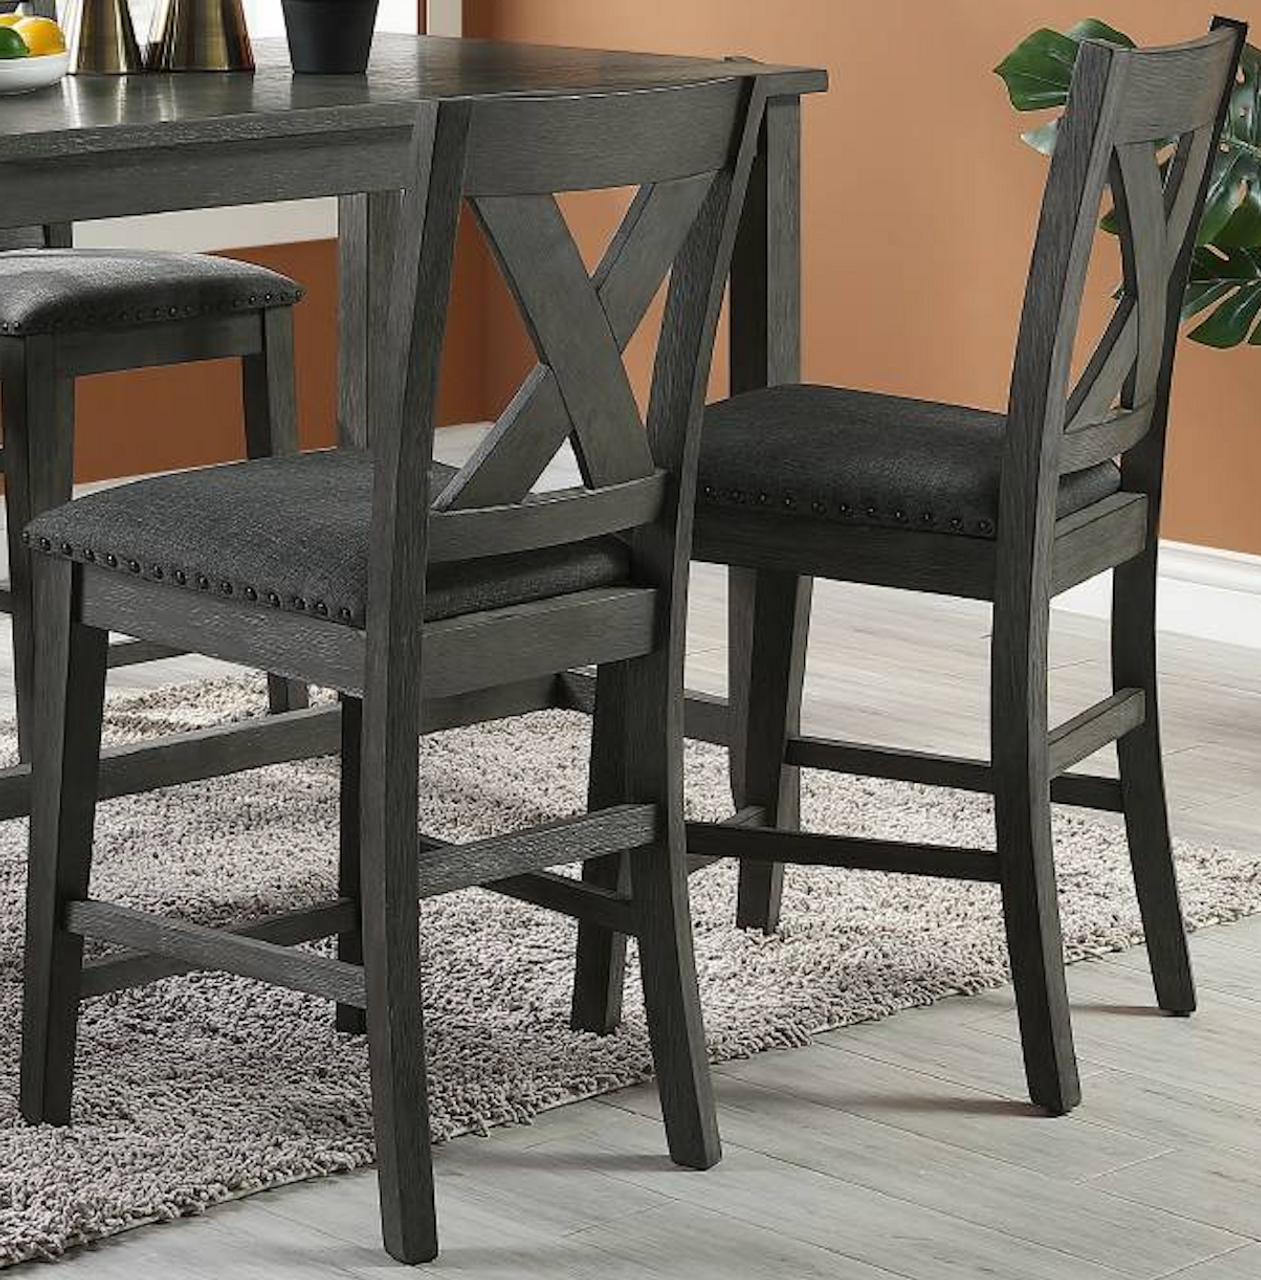 Modern Contemporary Dining Room Furniture Chairs Set gray wash-gray-dining room-classic-modern-dining